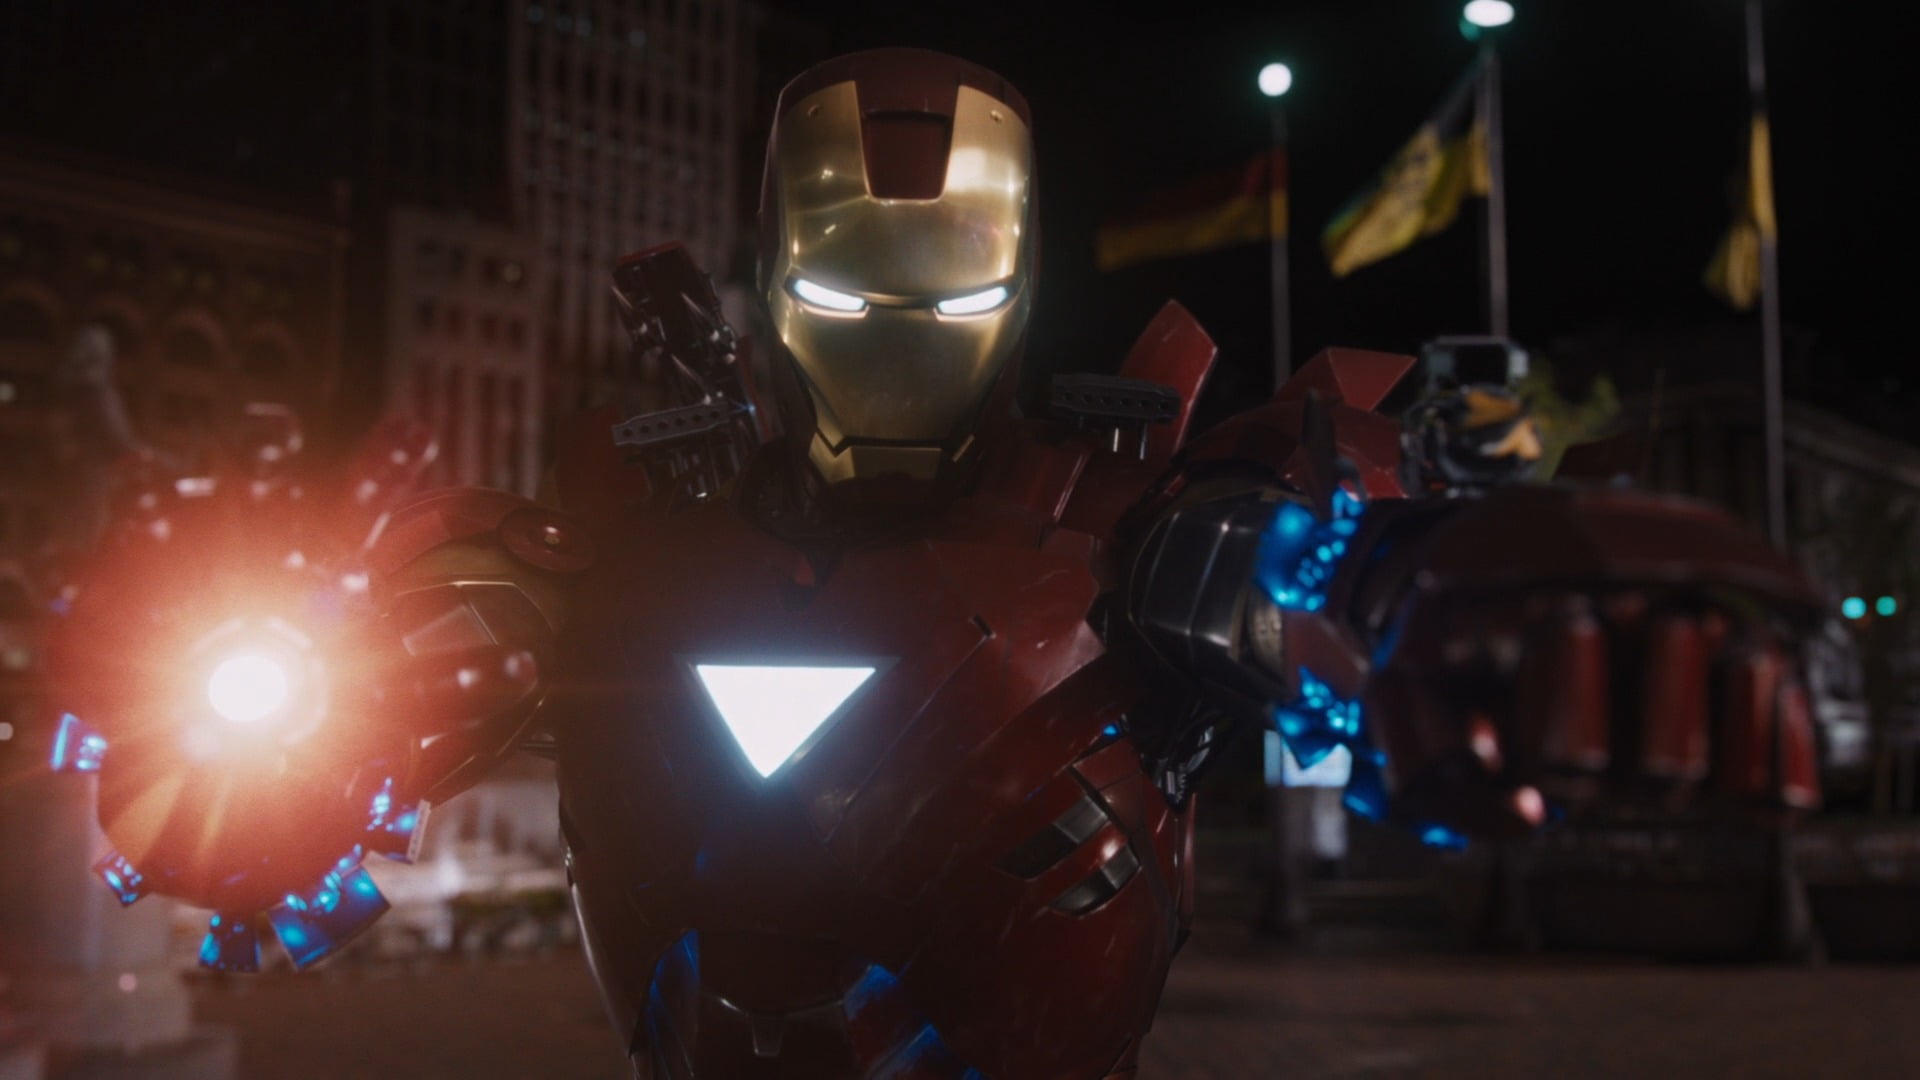 Free download | HD wallpaper: Iron Man, movies, The Avengers, Marvel ...